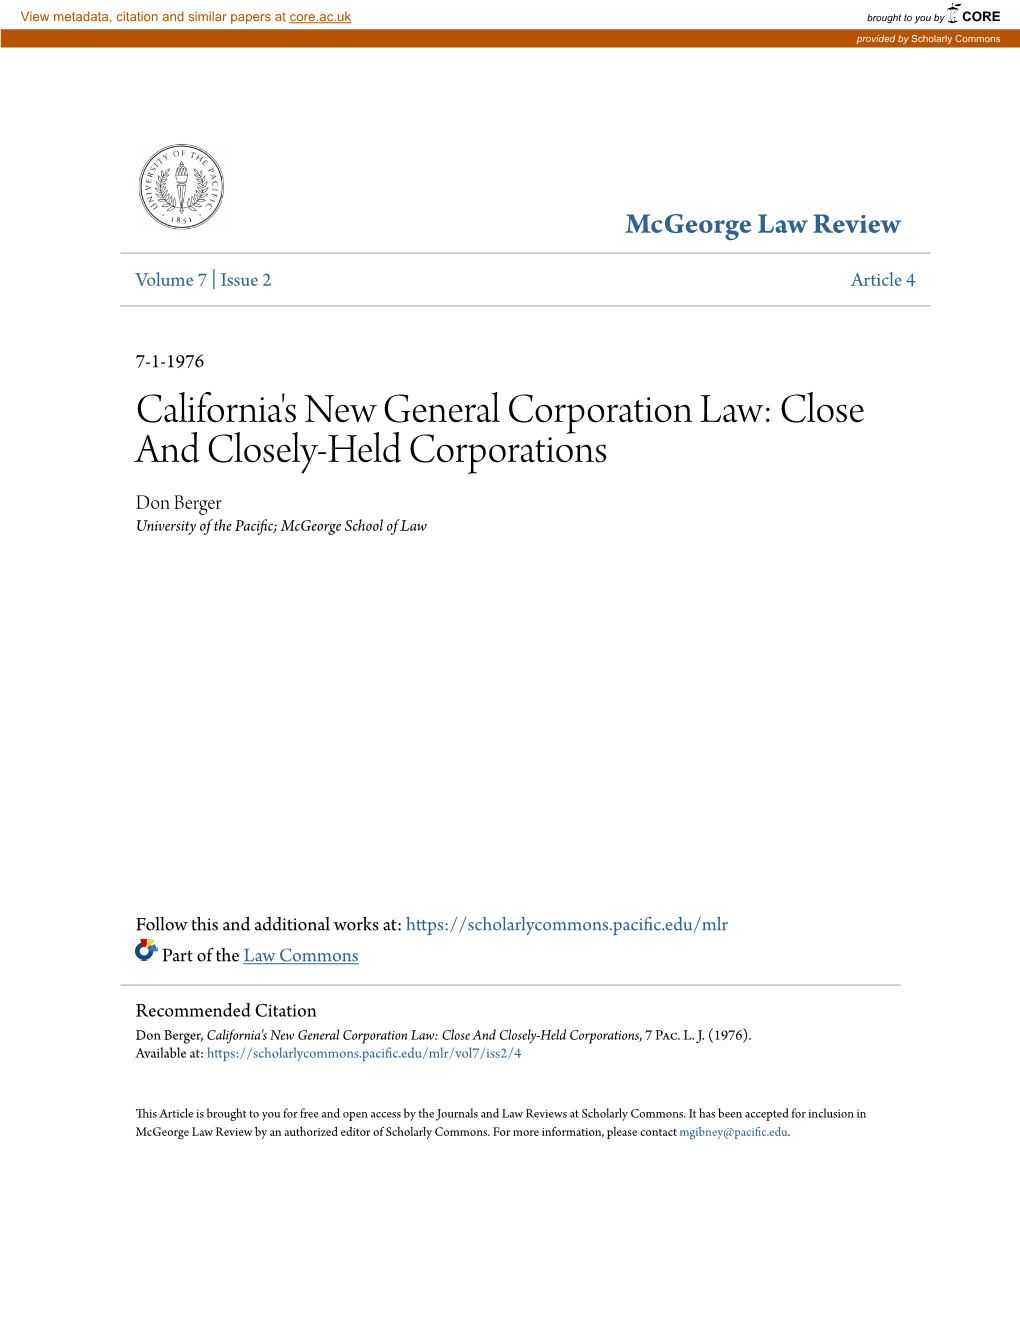 California's New General Corporation Law: Close and Closely-Held Corporations Don Berger University of the Pacific; Cgem Orge School of Law